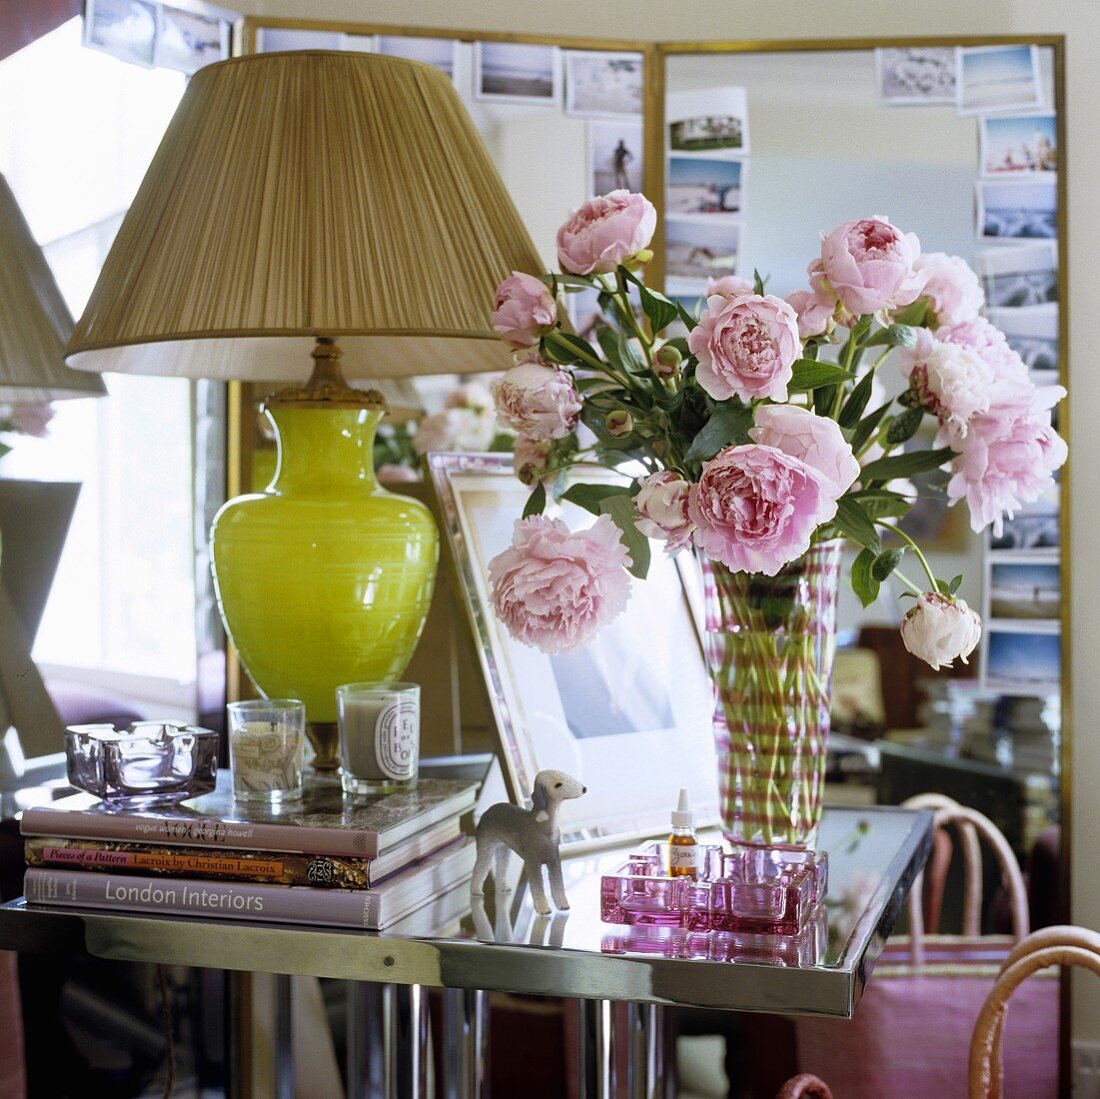 A table lamp with a green glass base and a pleated shade next to a bunch of roses in a glass vase on a side table